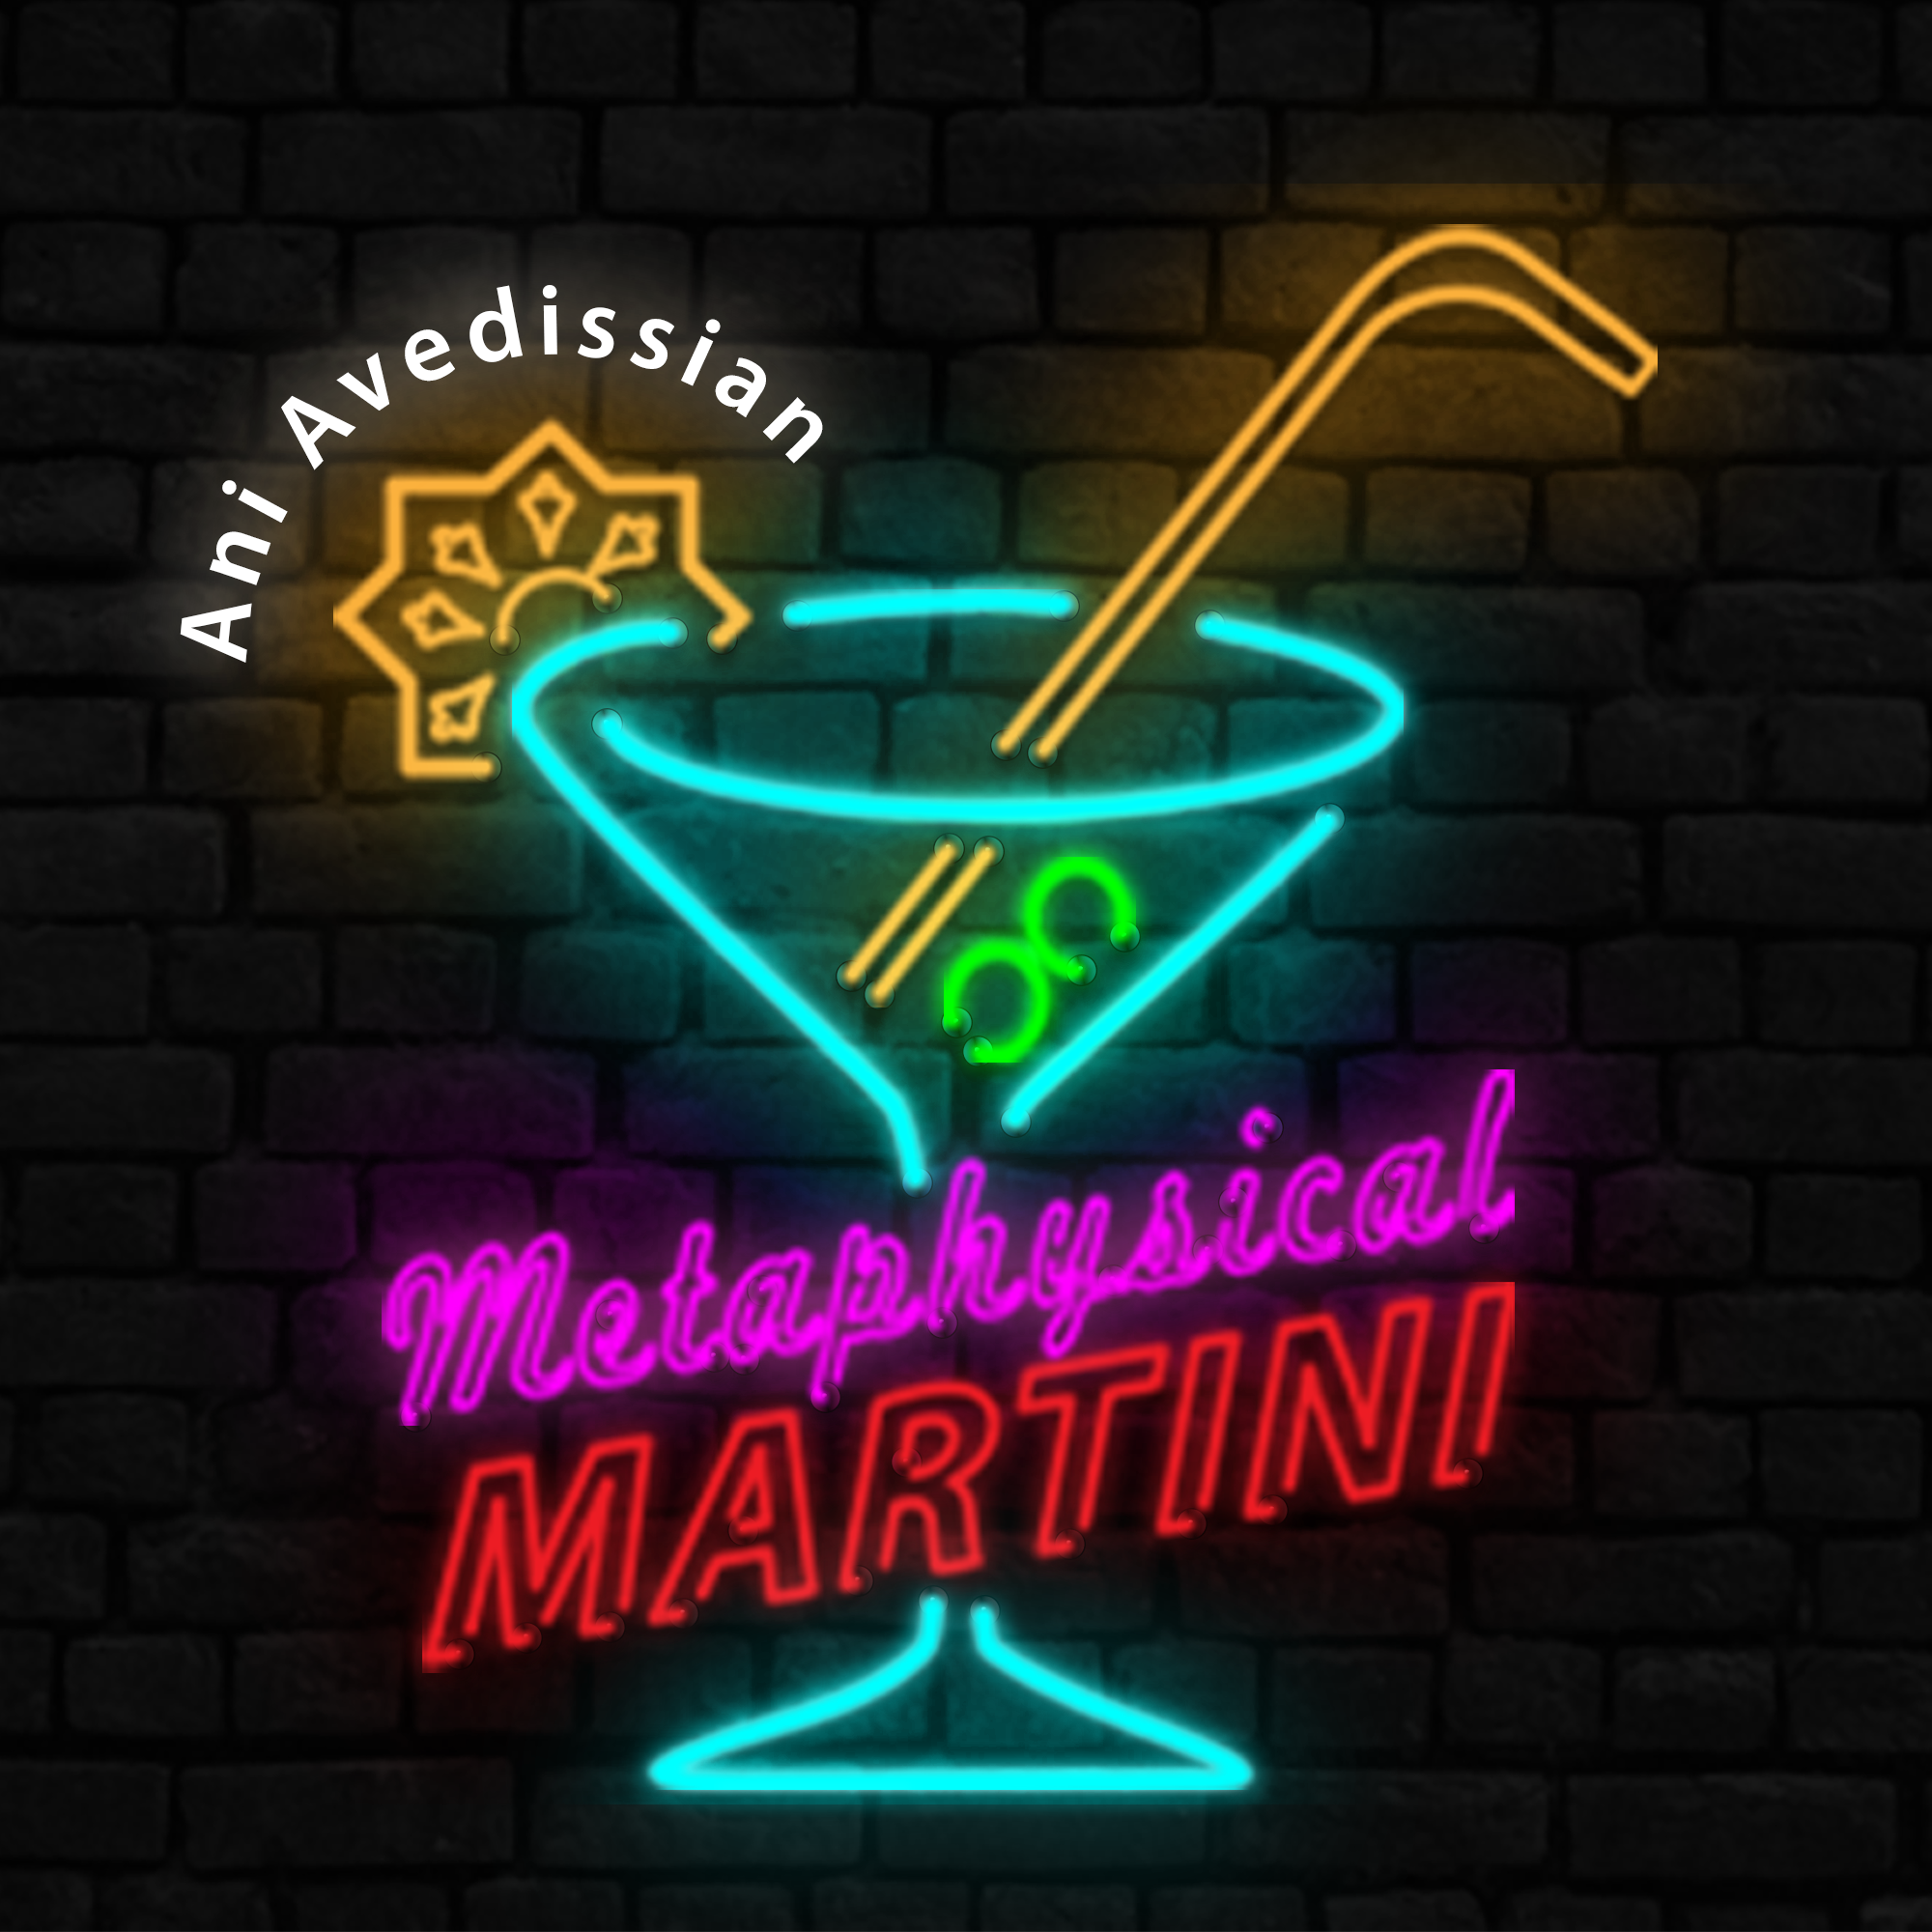 "Metaphysical Martini"   12/25/2019  A little HO HO for the holiday and possibly other stuff! HO